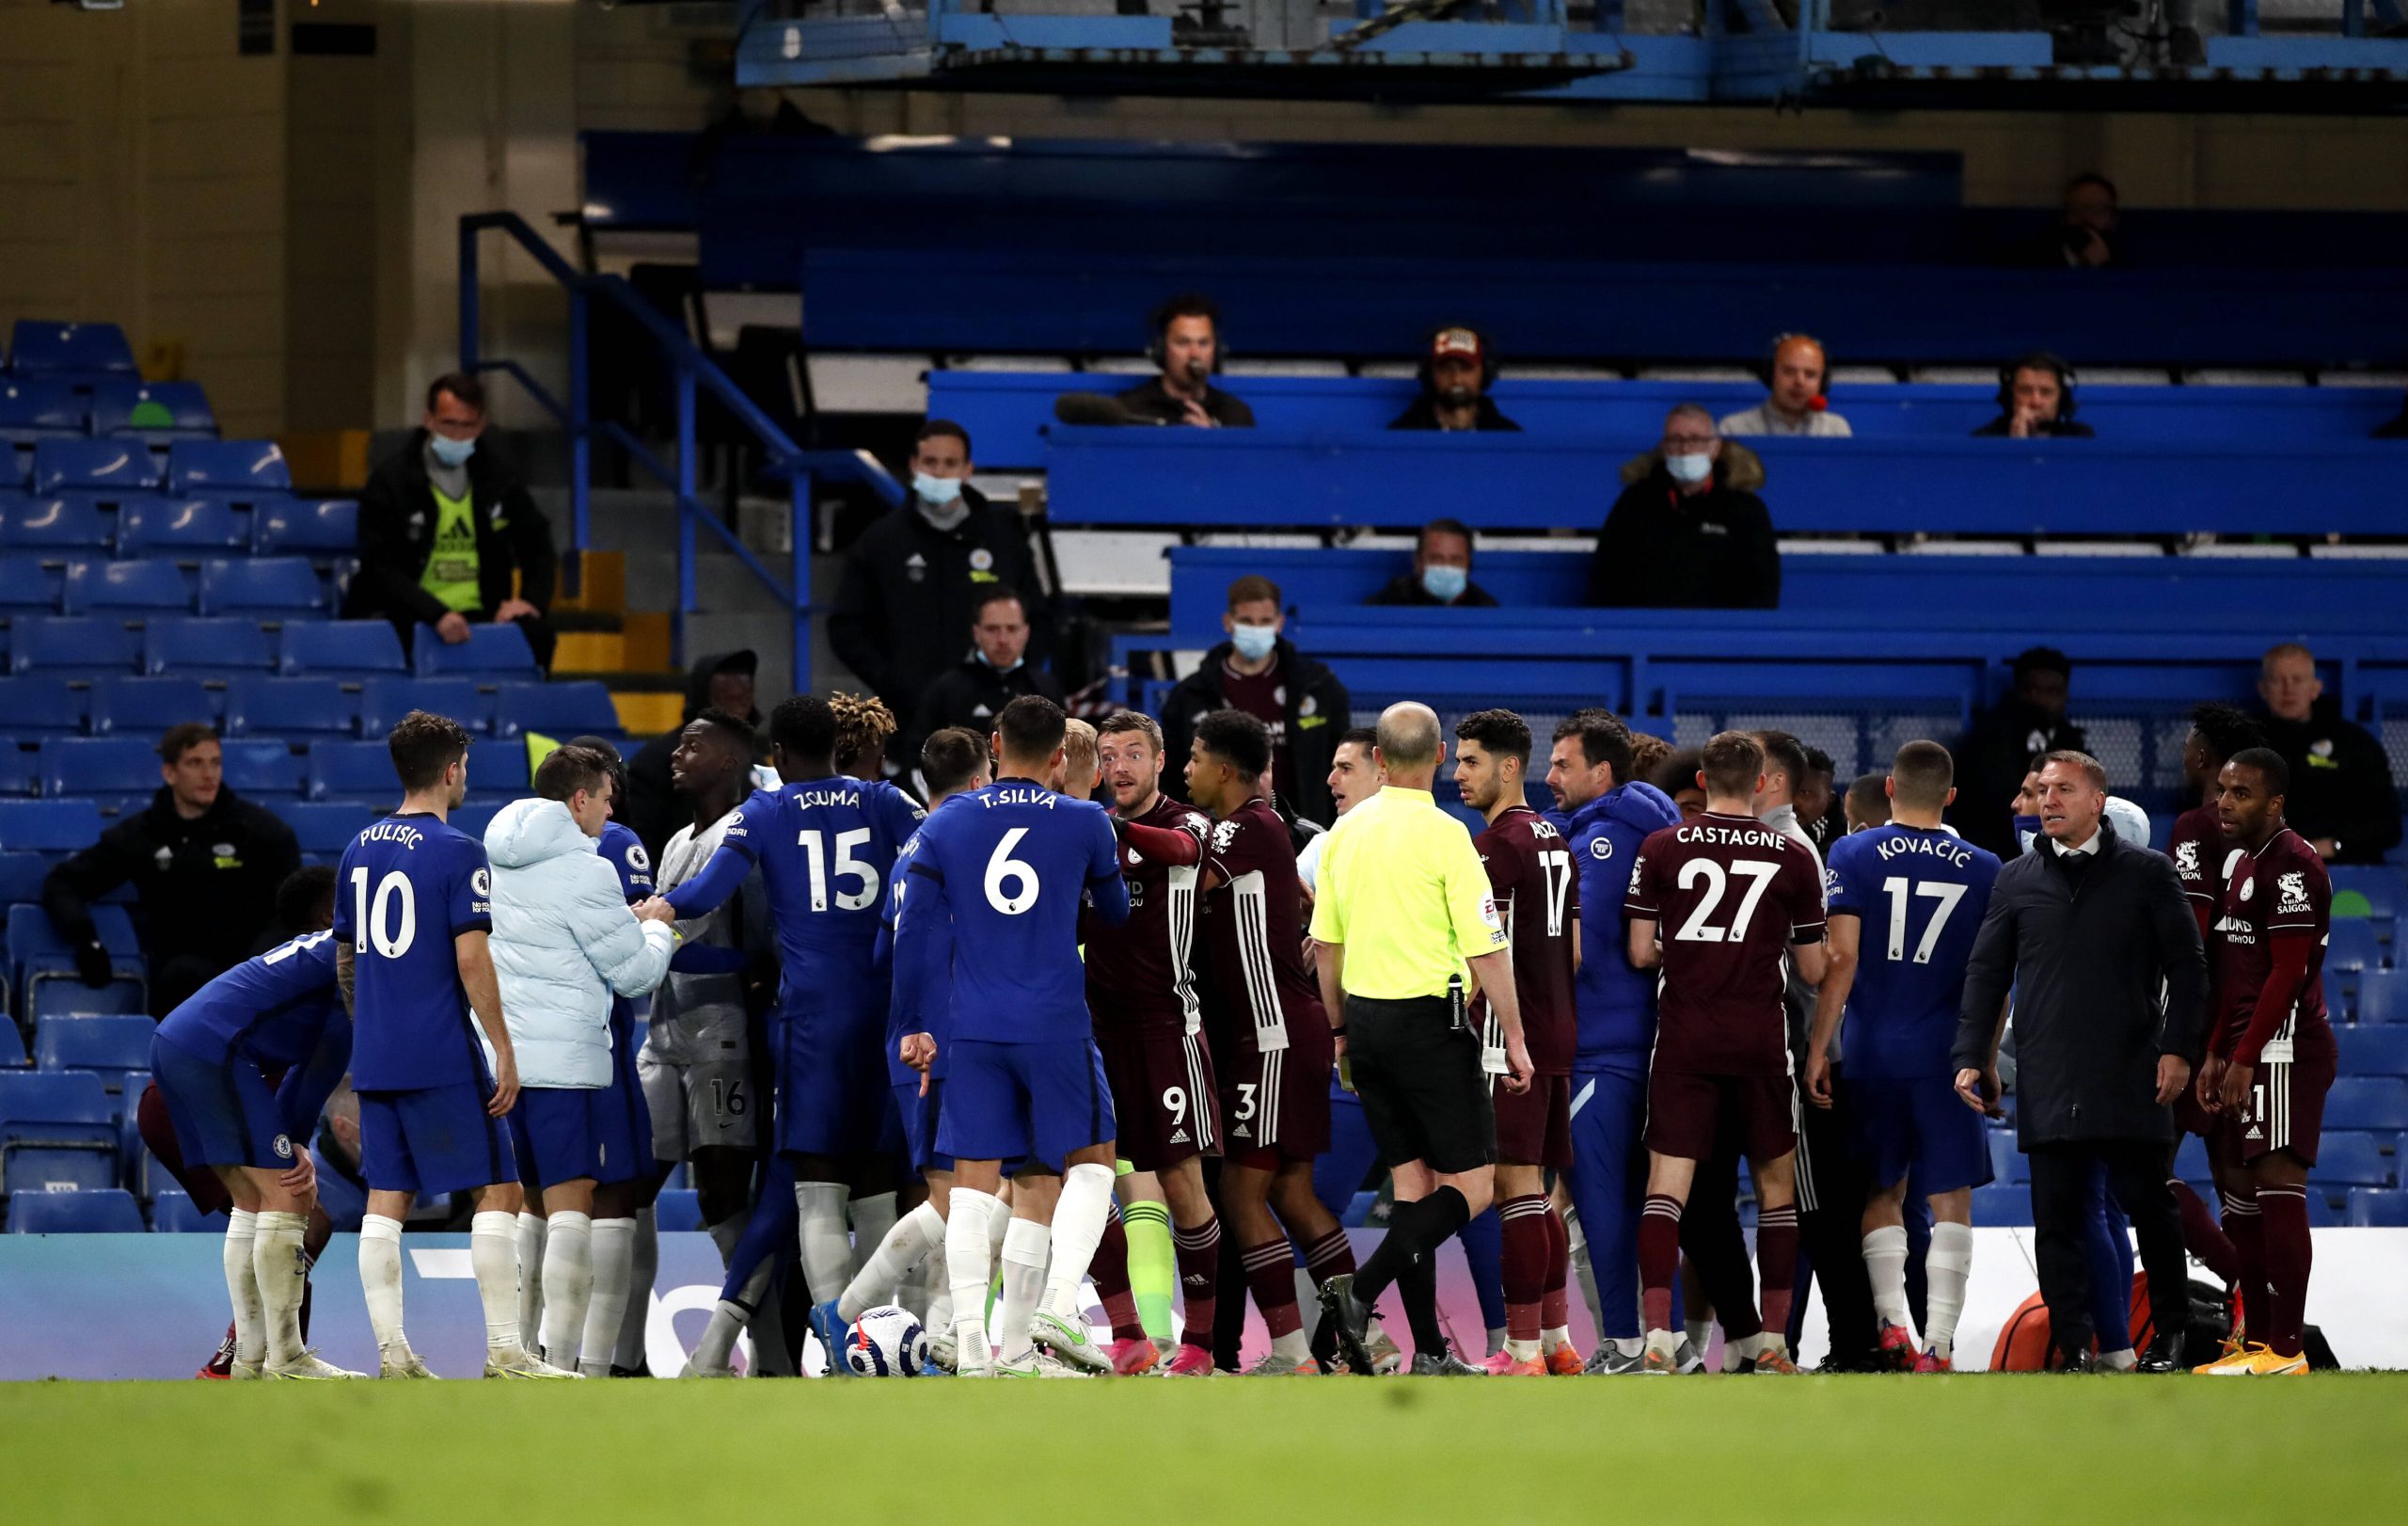 Chelsea face points deduction for their role in the Stamford Bridge clash with Leicester City players.